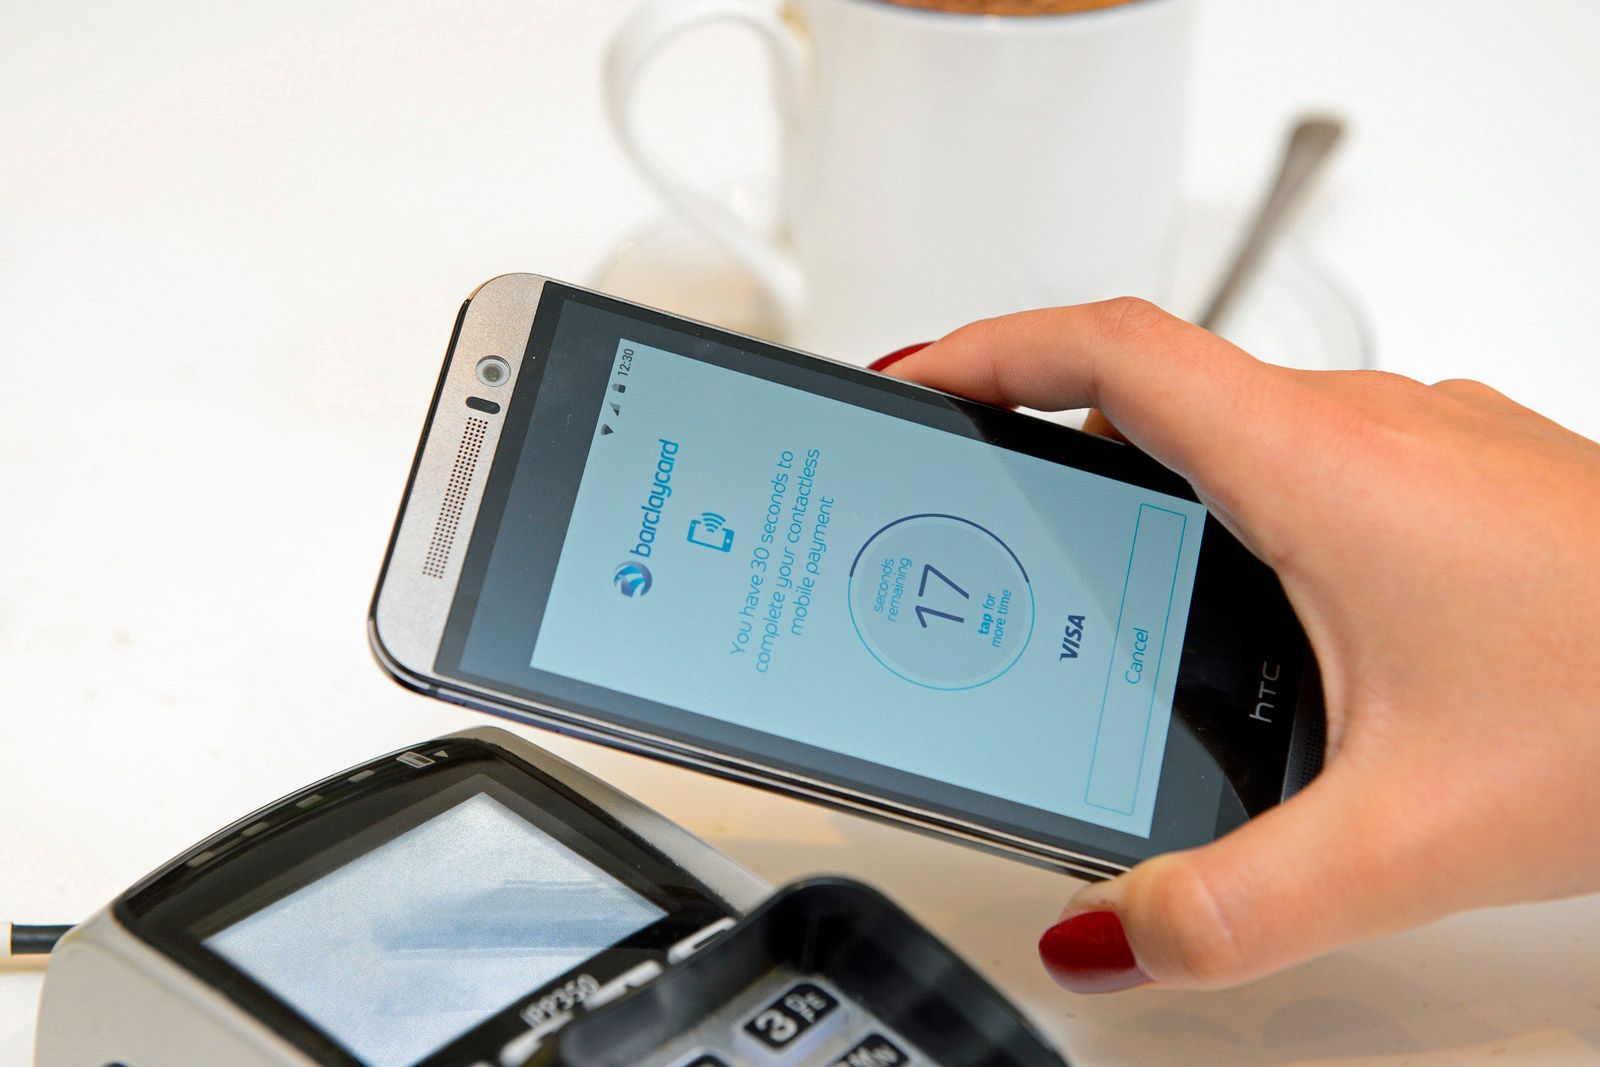 barclaycard to offer nfc payments up to 100 on android smartphones image 1